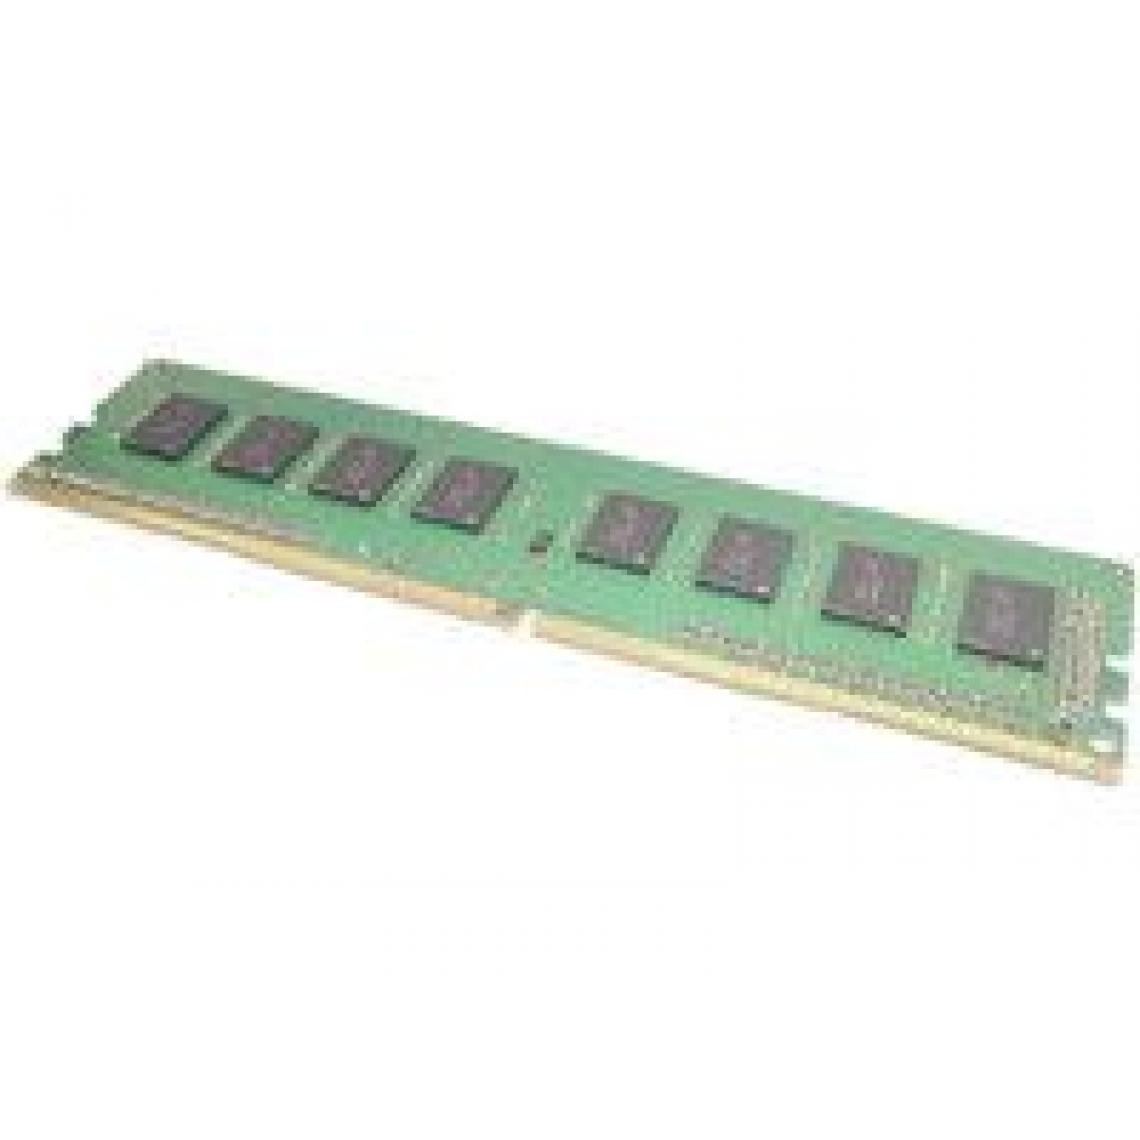 Because Music - MicroMemory 4GB DDR4 2133Mhz 4Go DDR4 2133MHz module de mémoire - modules de mémoire (4 Go, DDR4, 2133 MHz) - RAM PC Fixe